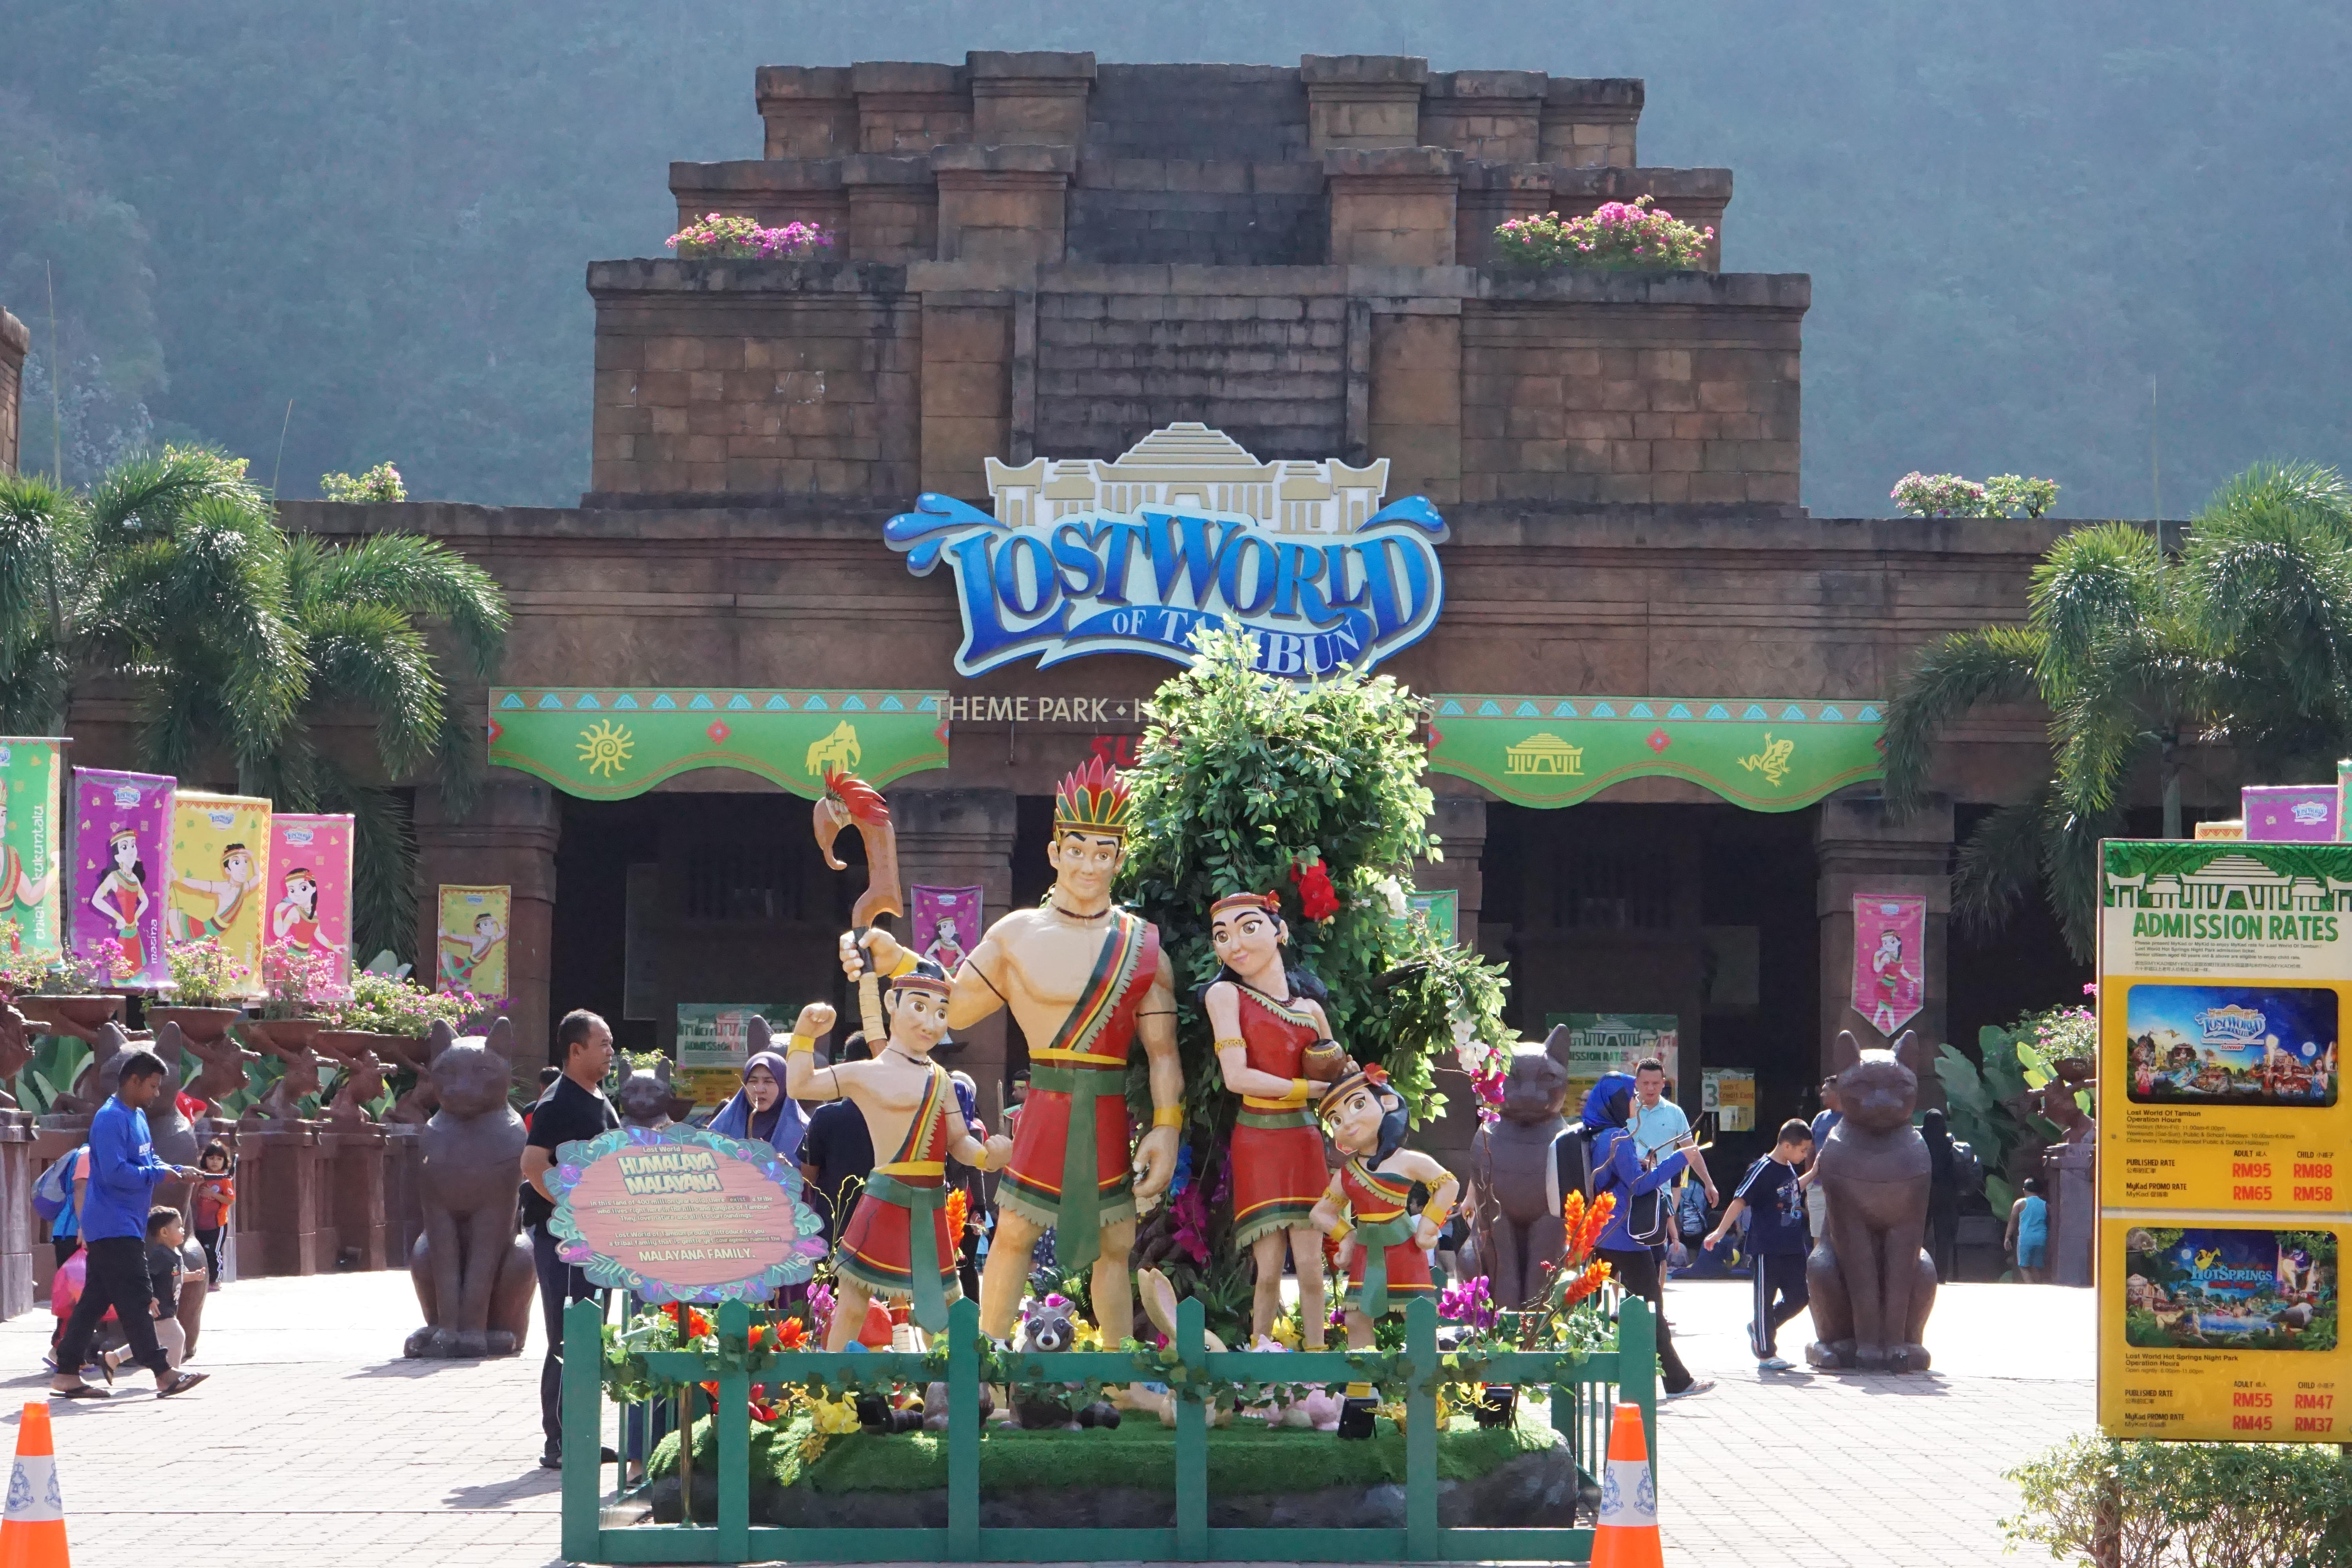 Activities at Lost World